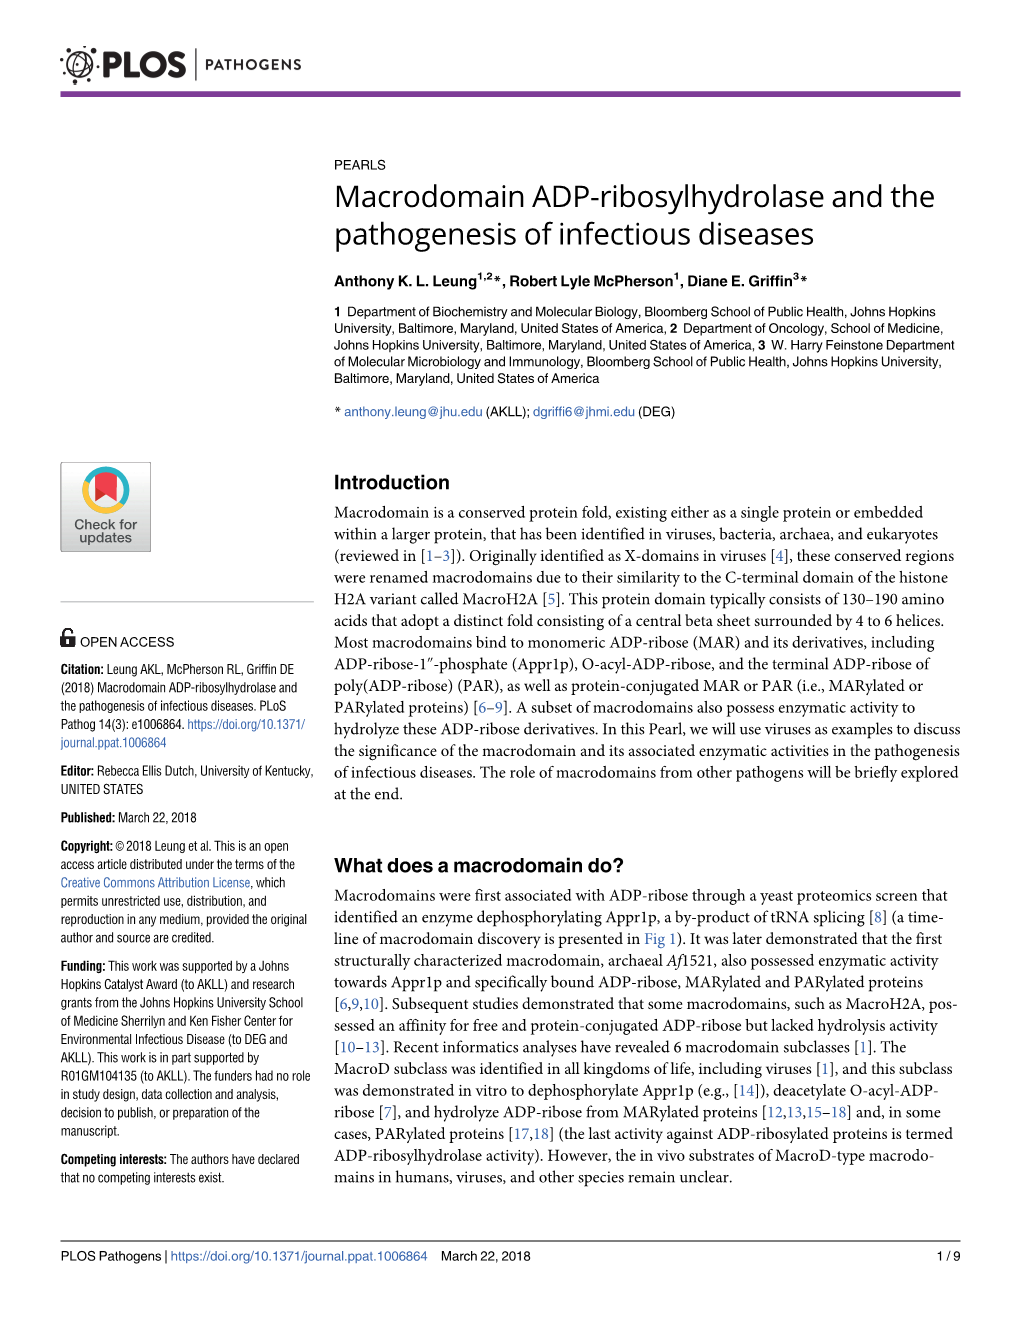 Macrodomain ADP-Ribosylhydrolase and the Pathogenesis of Infectious Diseases